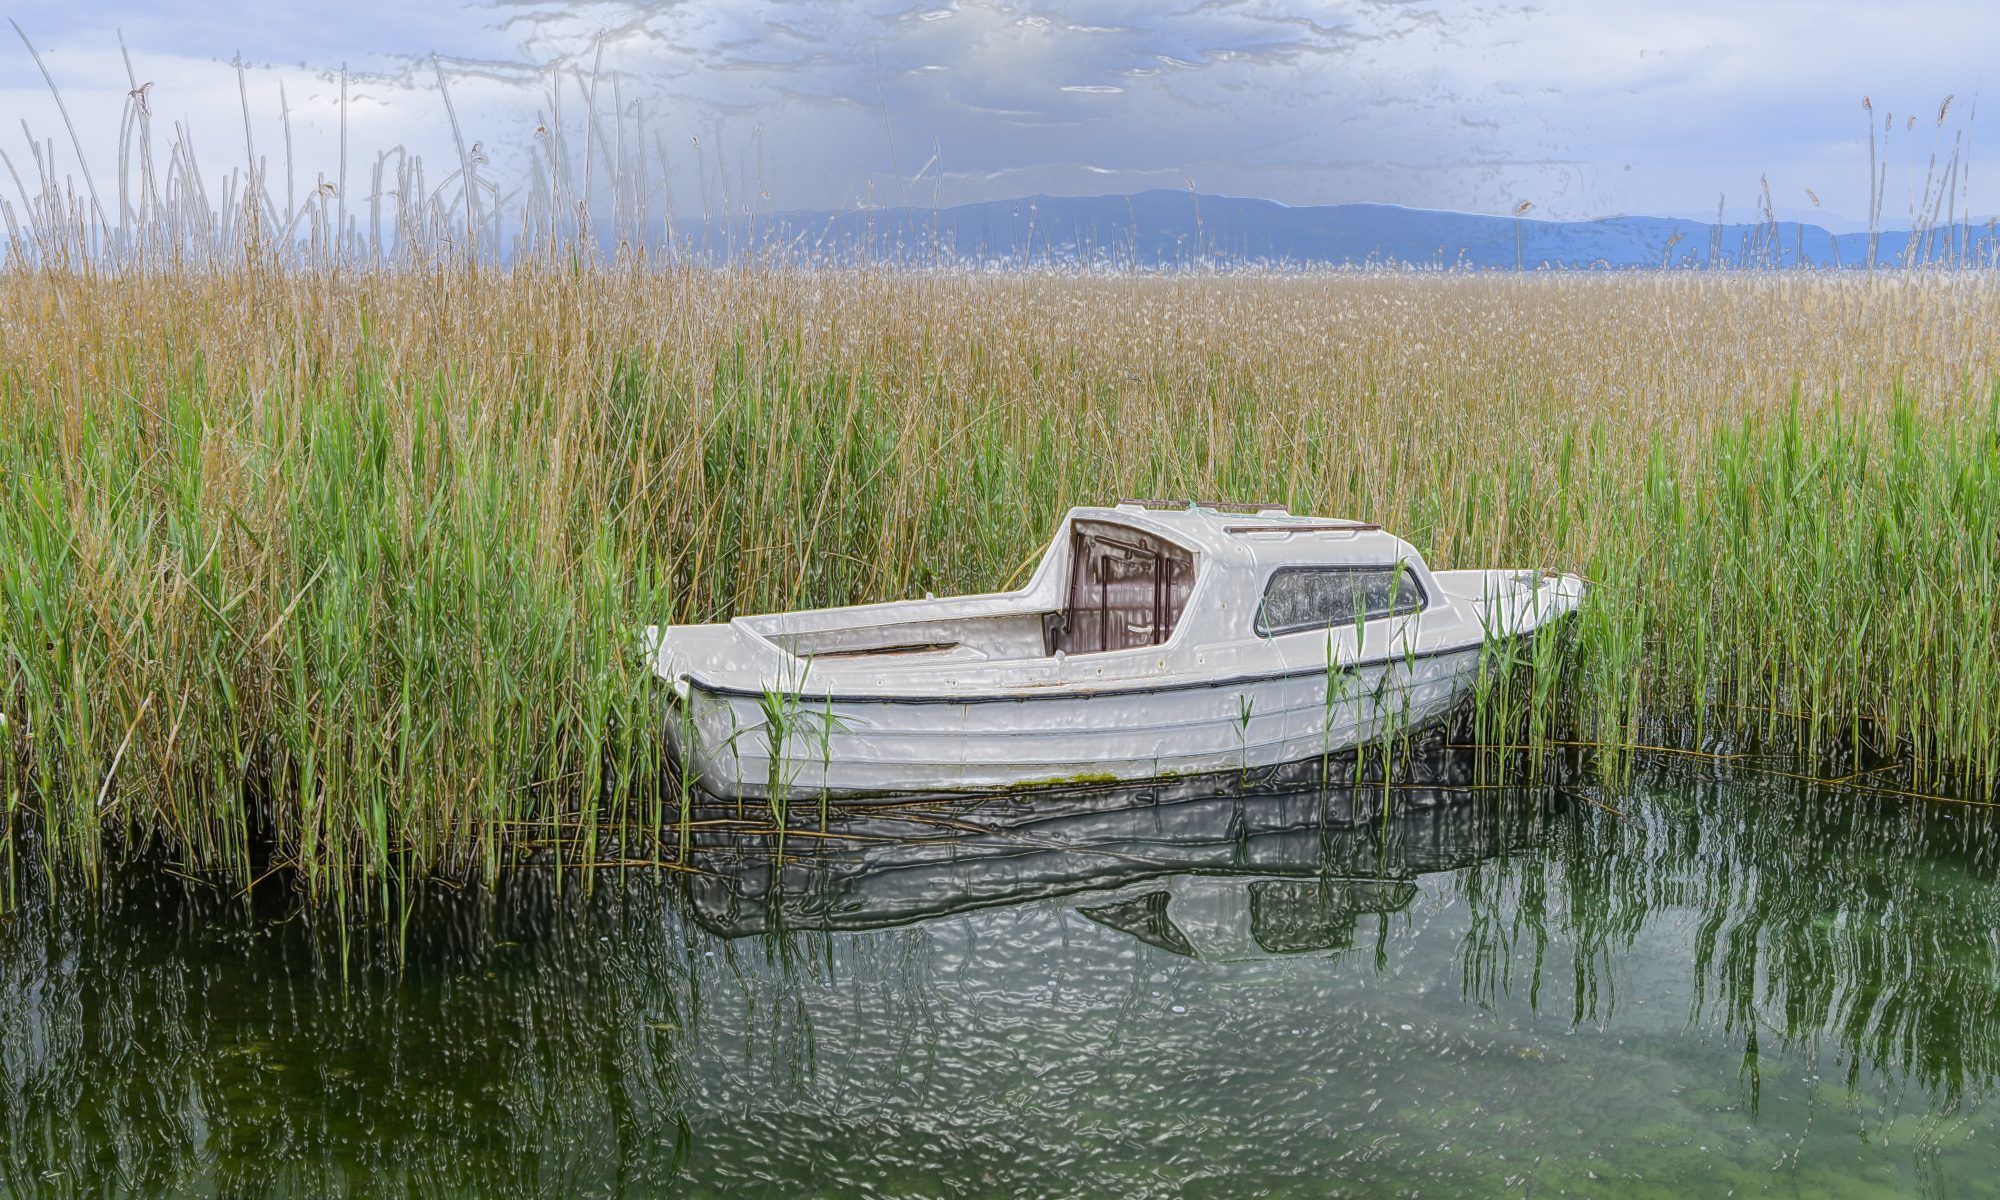 "Boat Amongst The Reeds"